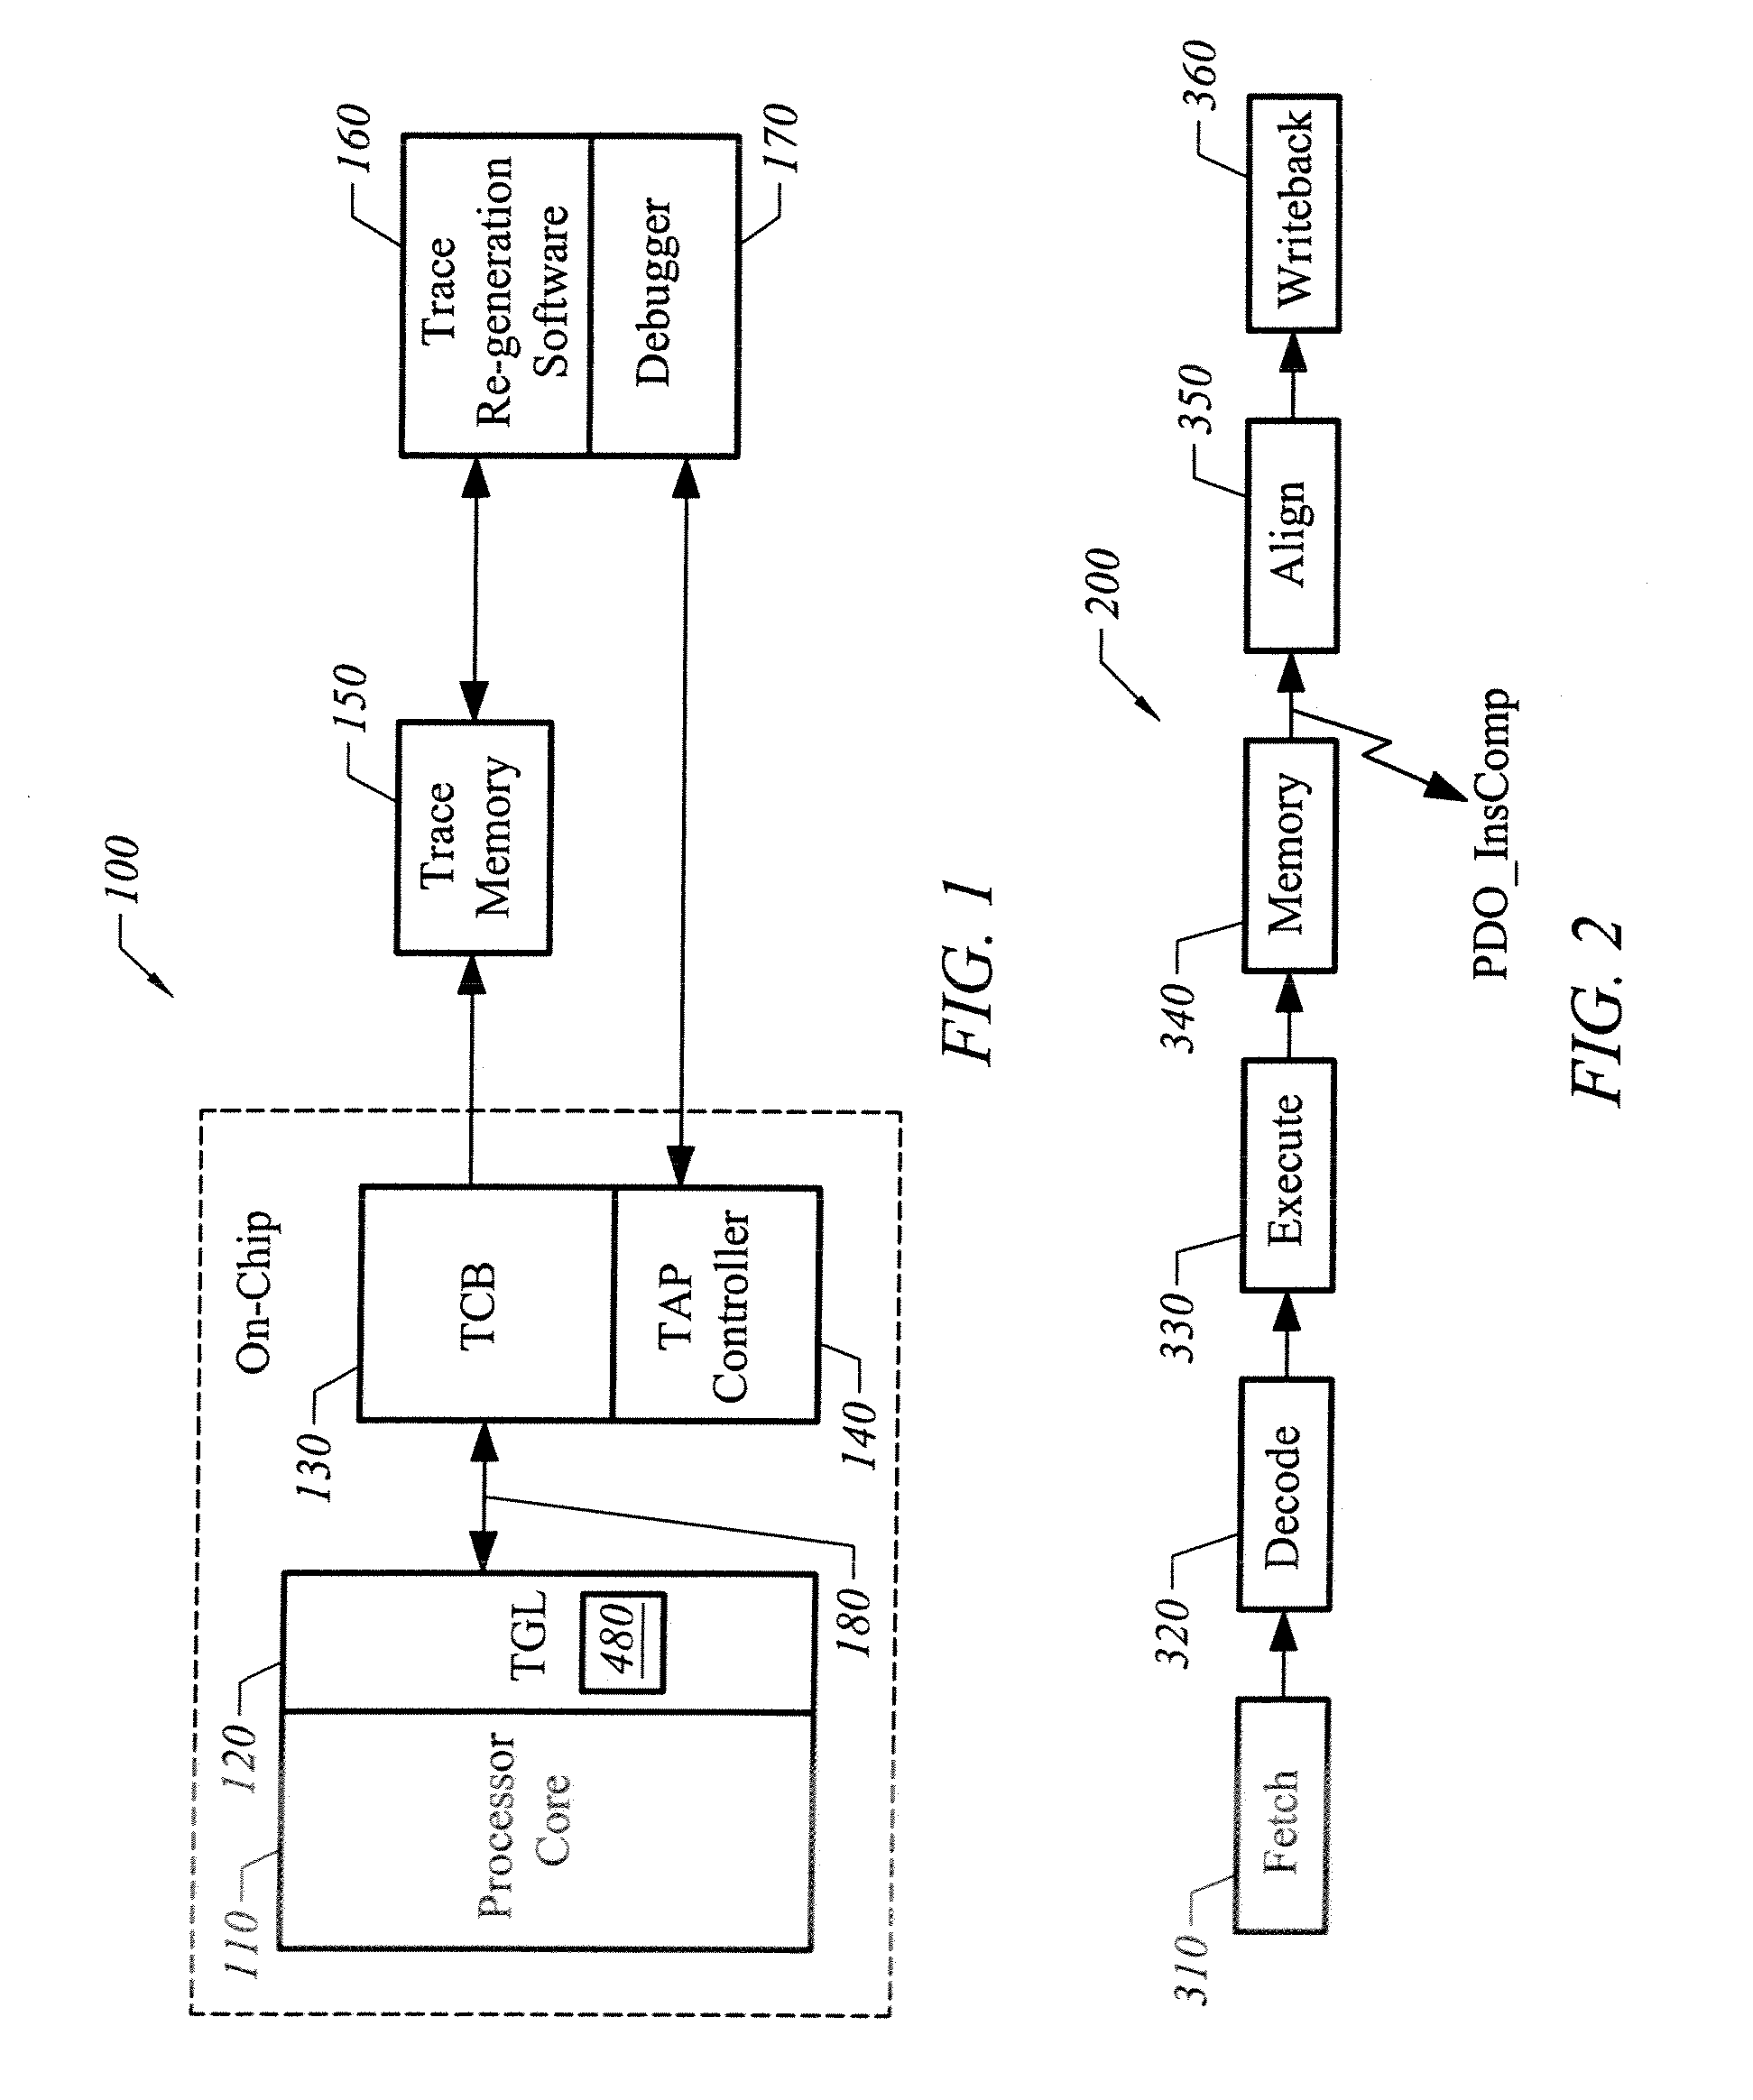 Apparatus and method to trace high performance multi-issue processors